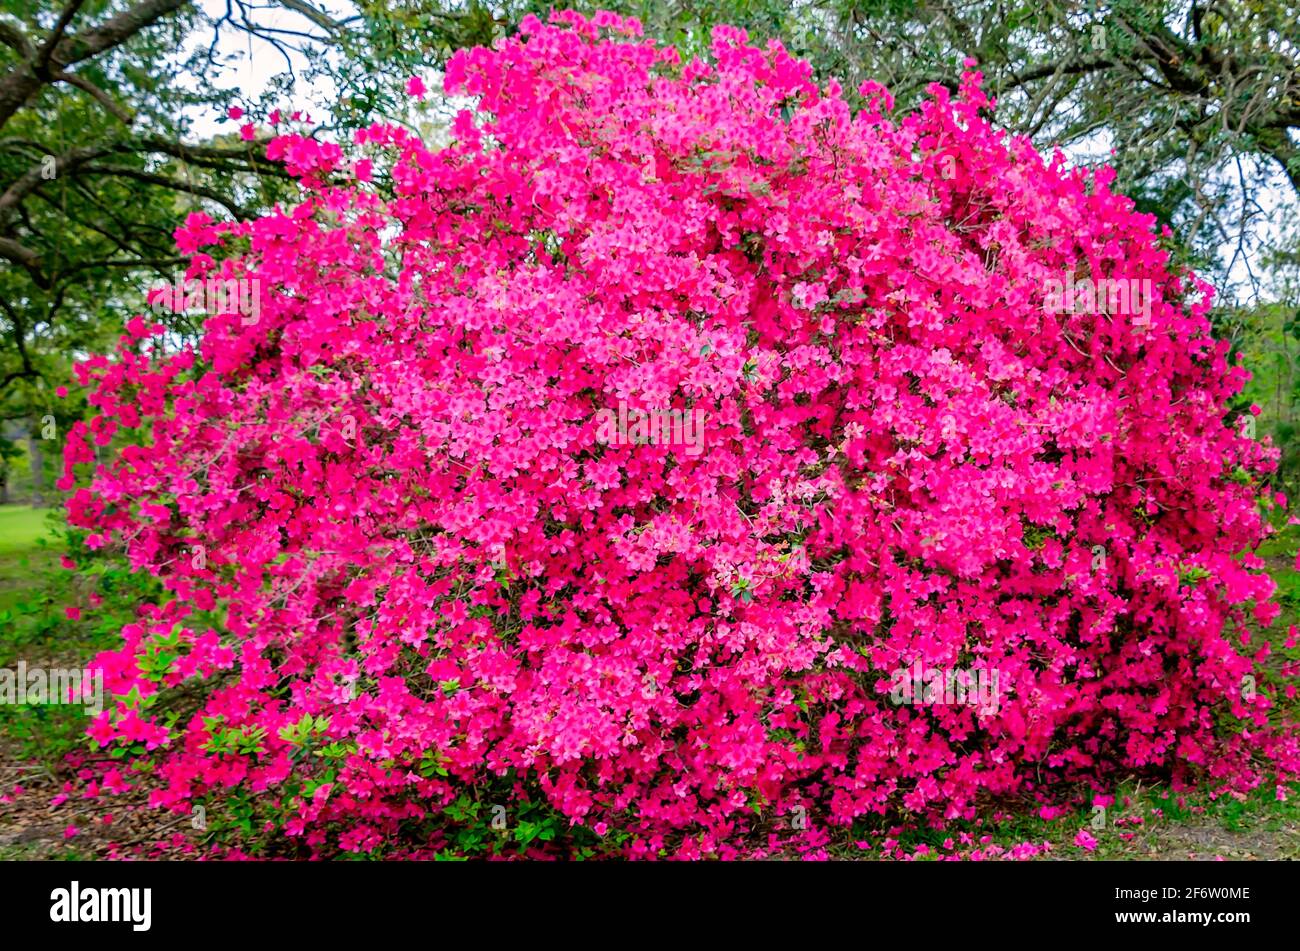 A pink azalea blooms in a yard, March 30, 2021, in Coden, Alabama. Azaleas are popular ornamental shrubs in the American South. Stock Photo